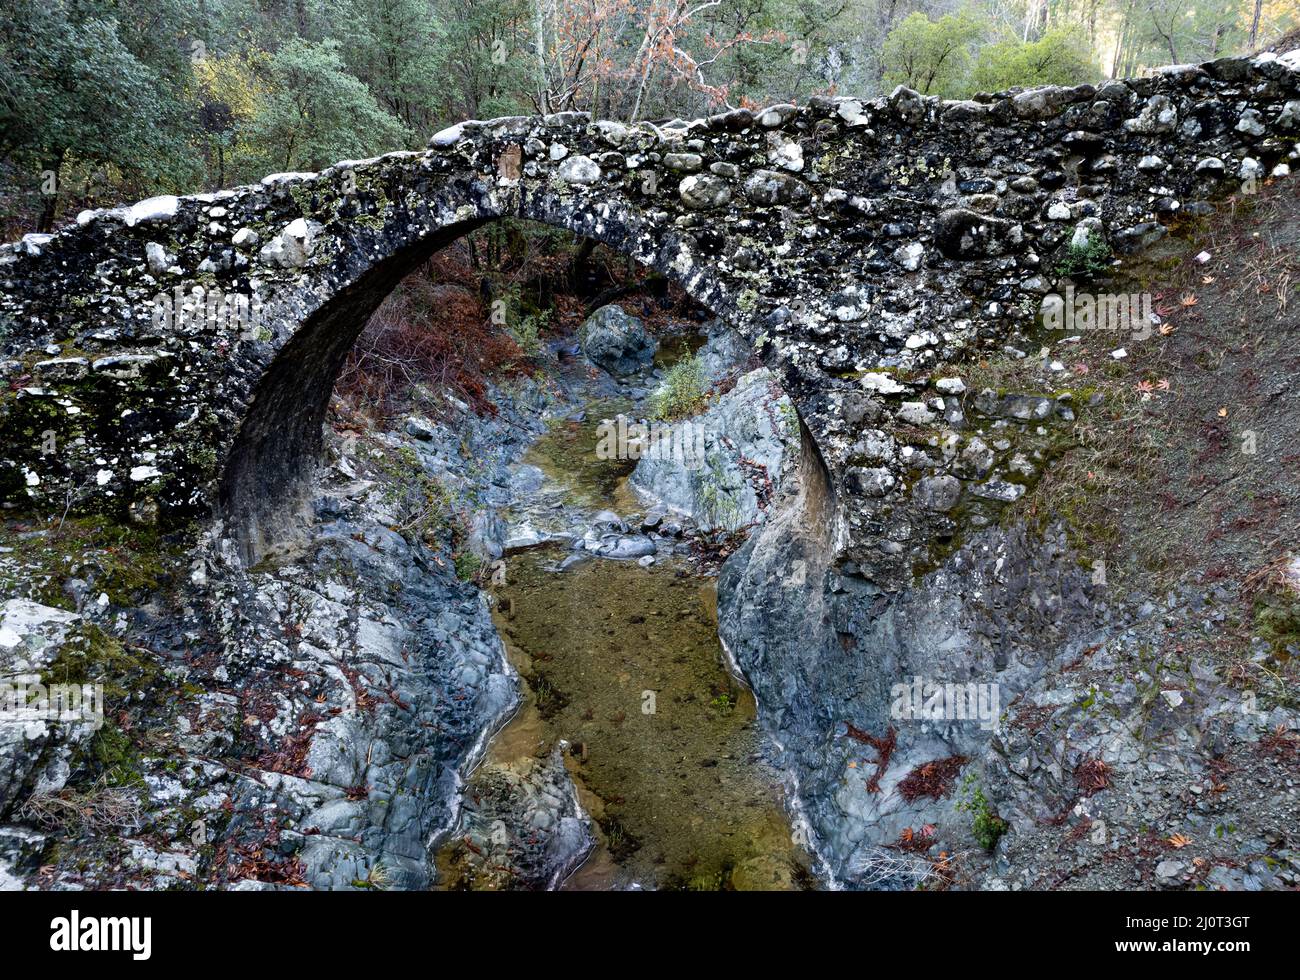 Aerial drone photograph of a medieval stoned bridge with water flowing in the river. Elia Bridge Troodos Cyprus Stock Photo